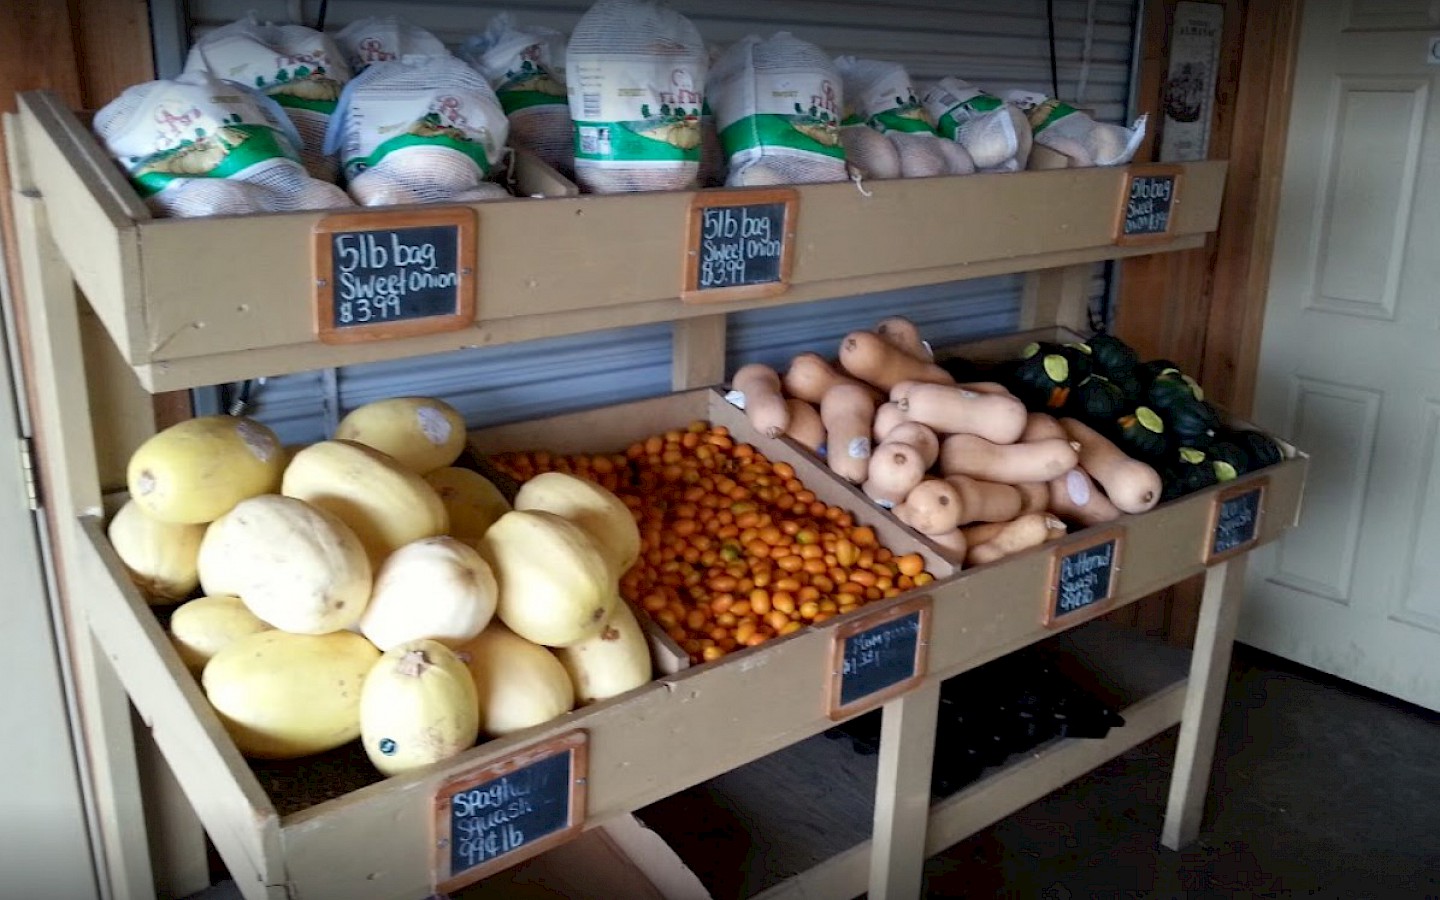 various vegetables, including squash, tomatoes, and sweet potatoes on display at the market